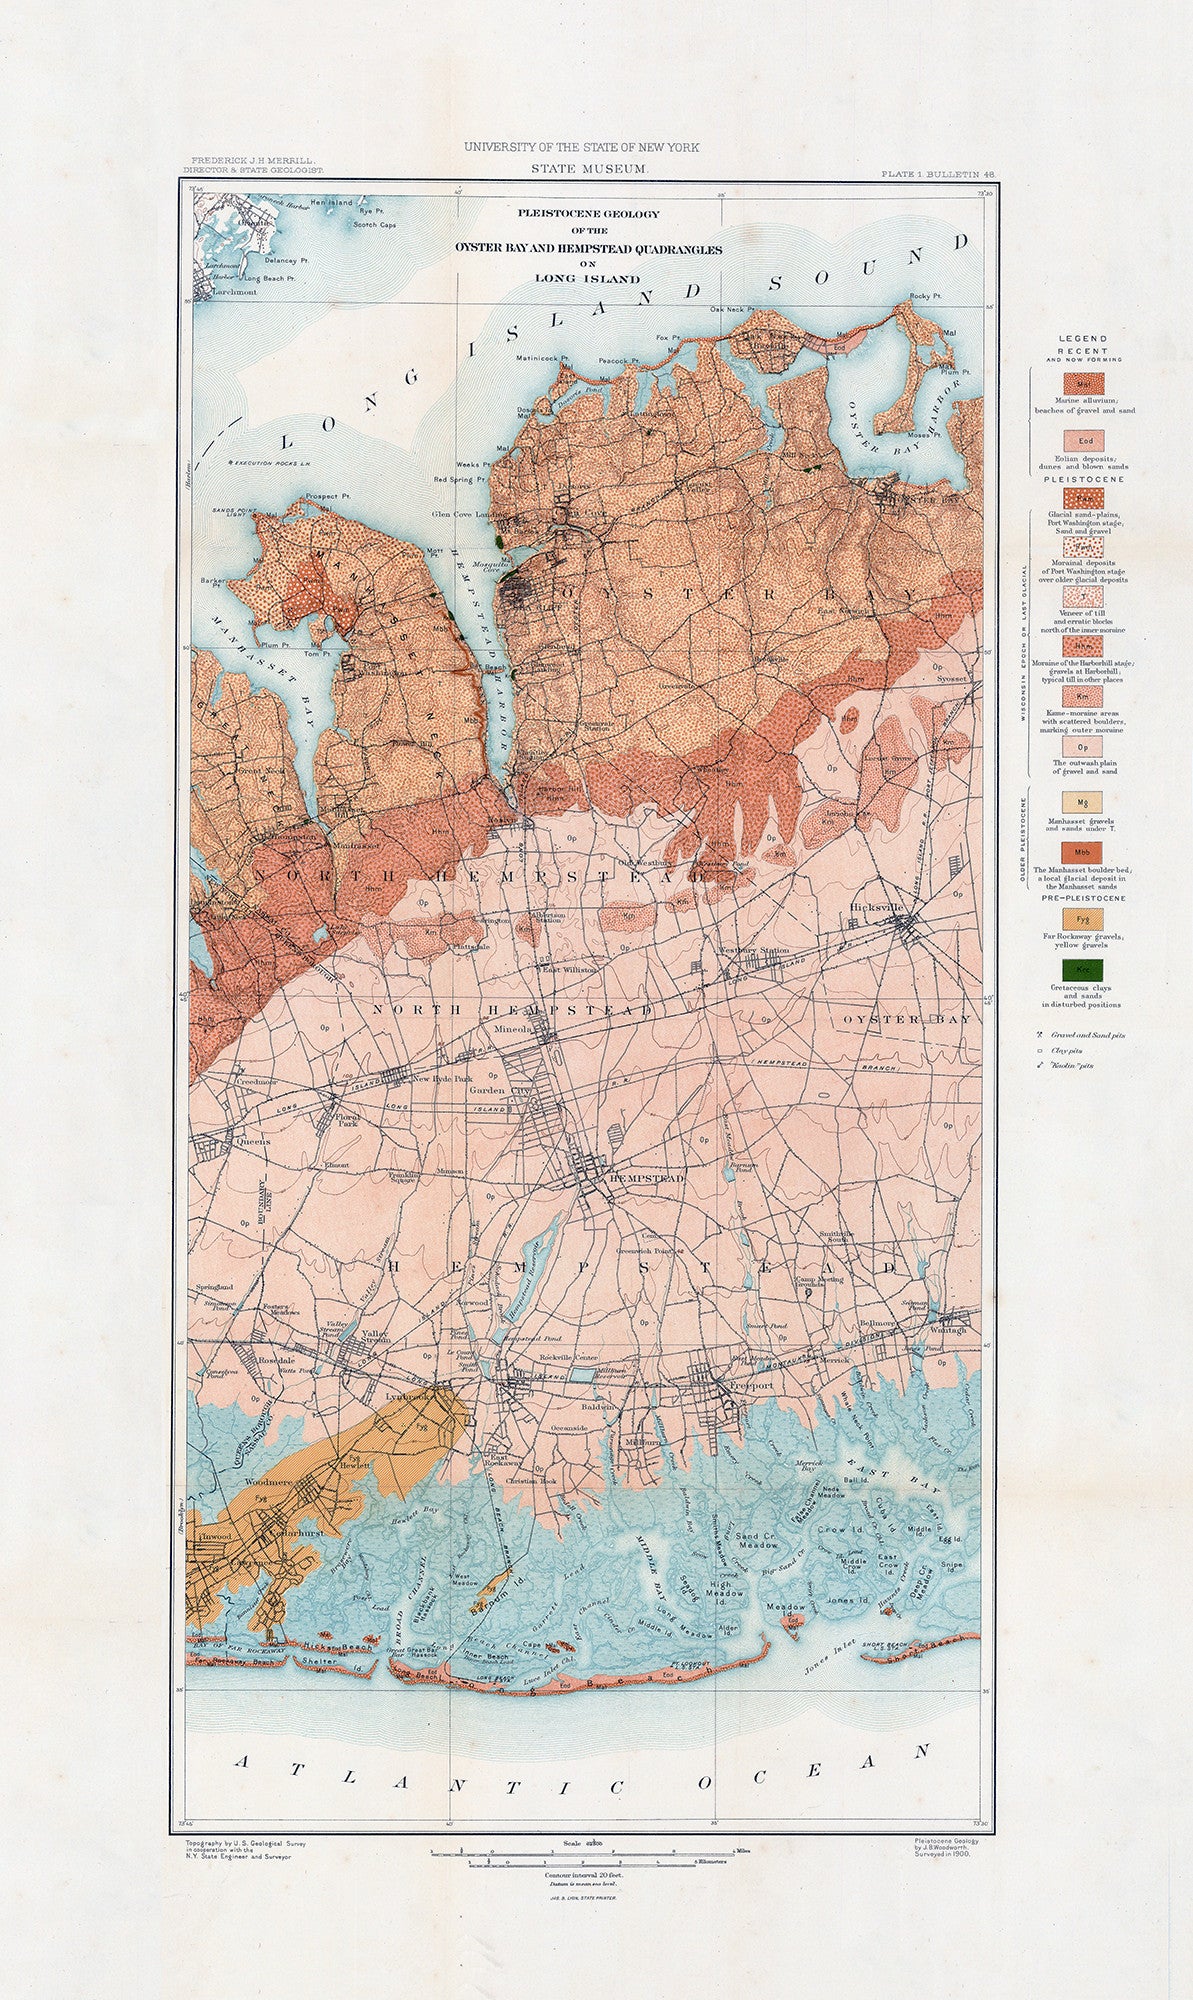 Oyster Bay and Hempstead on Long Island Geological Map - Print - Stomping Grounds